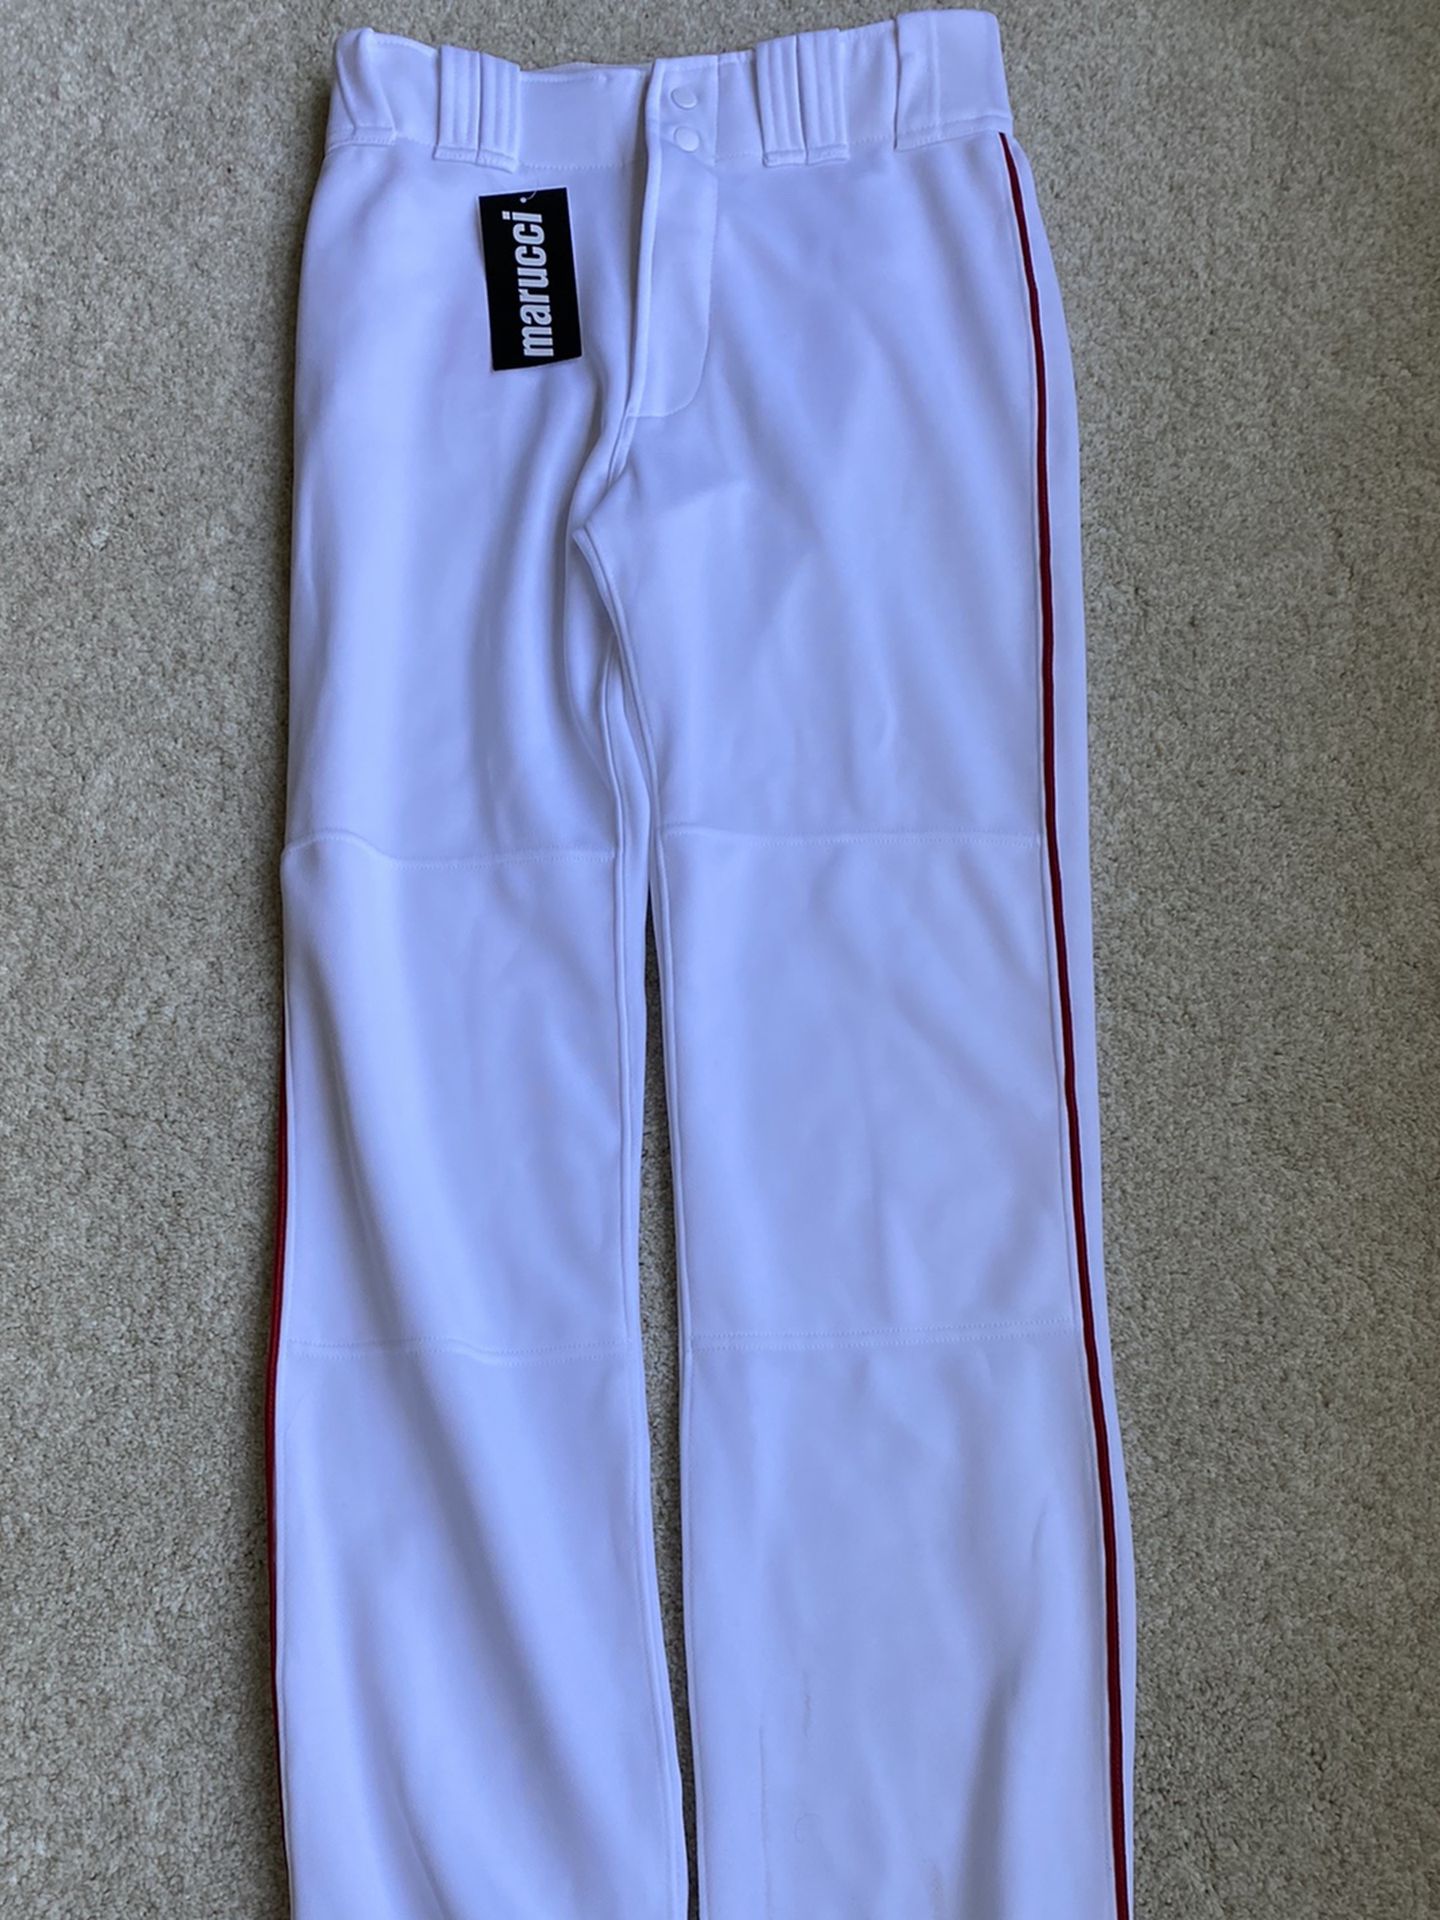 Marucci white  baseball  Pants with Red Piping Adult small